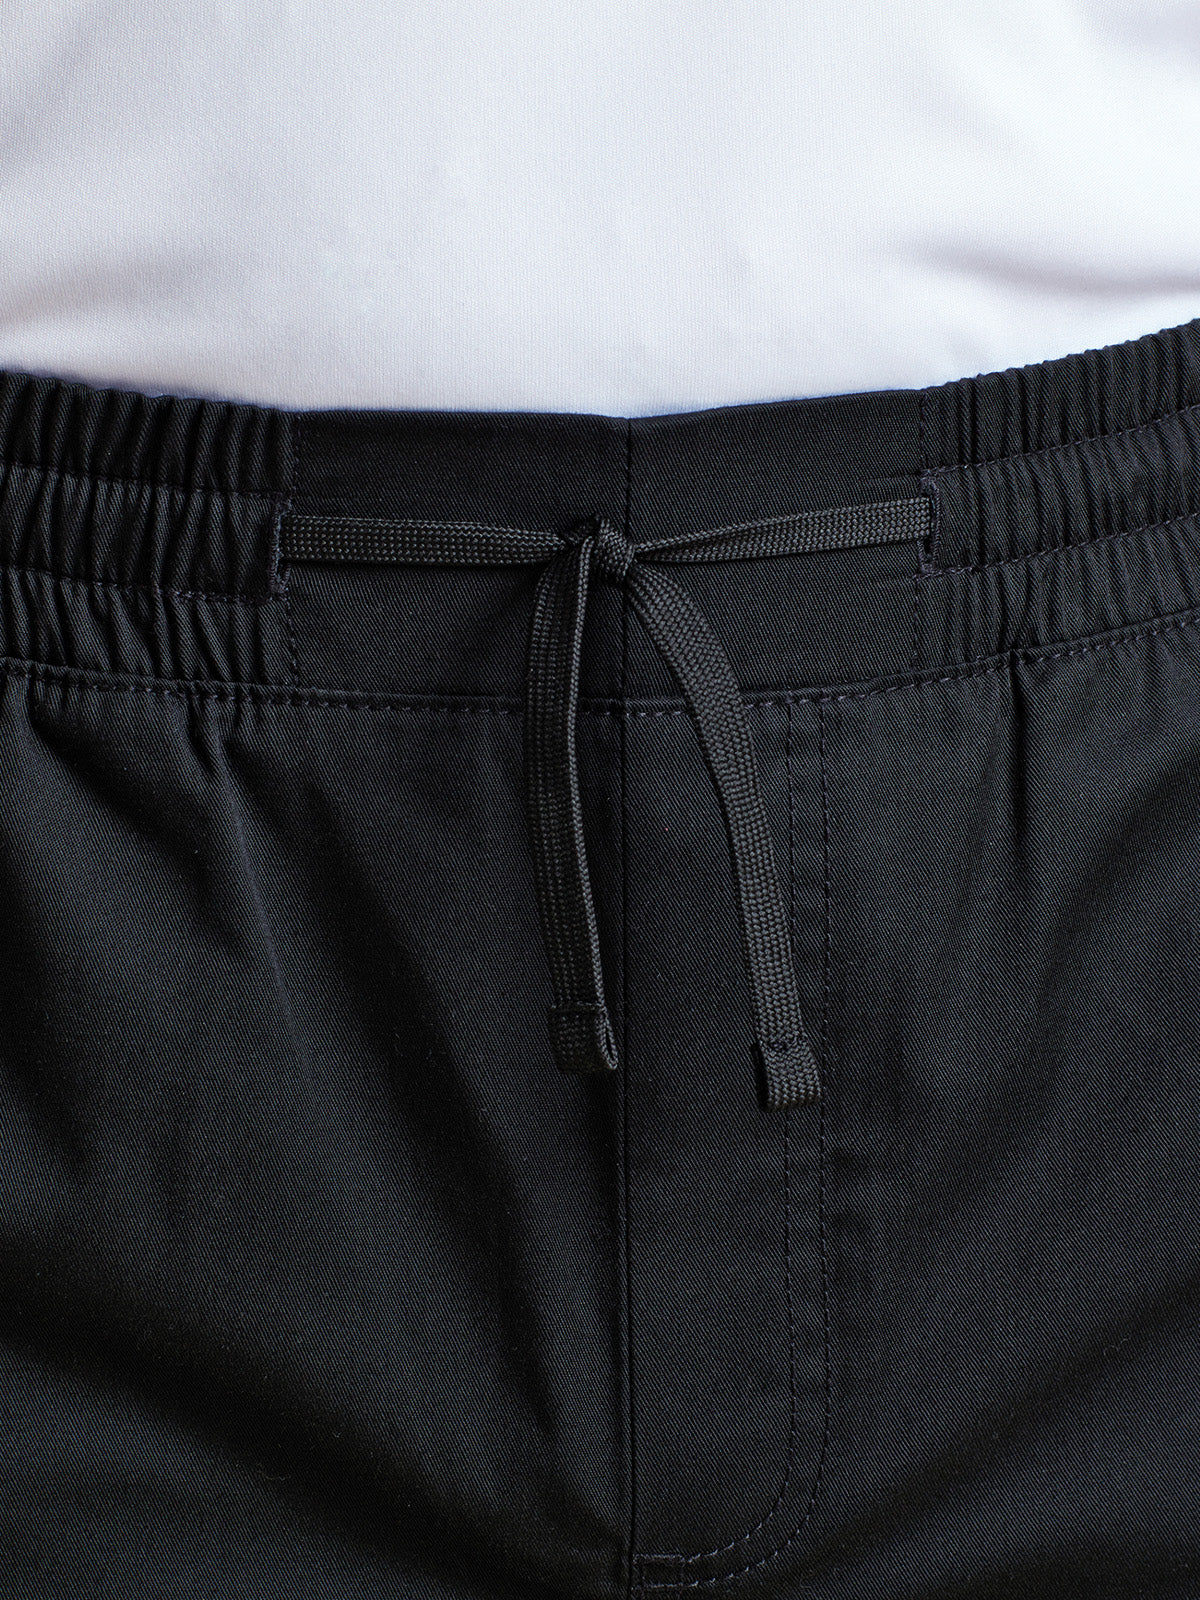 Chef's 'Recyclight' Cargo Trouser